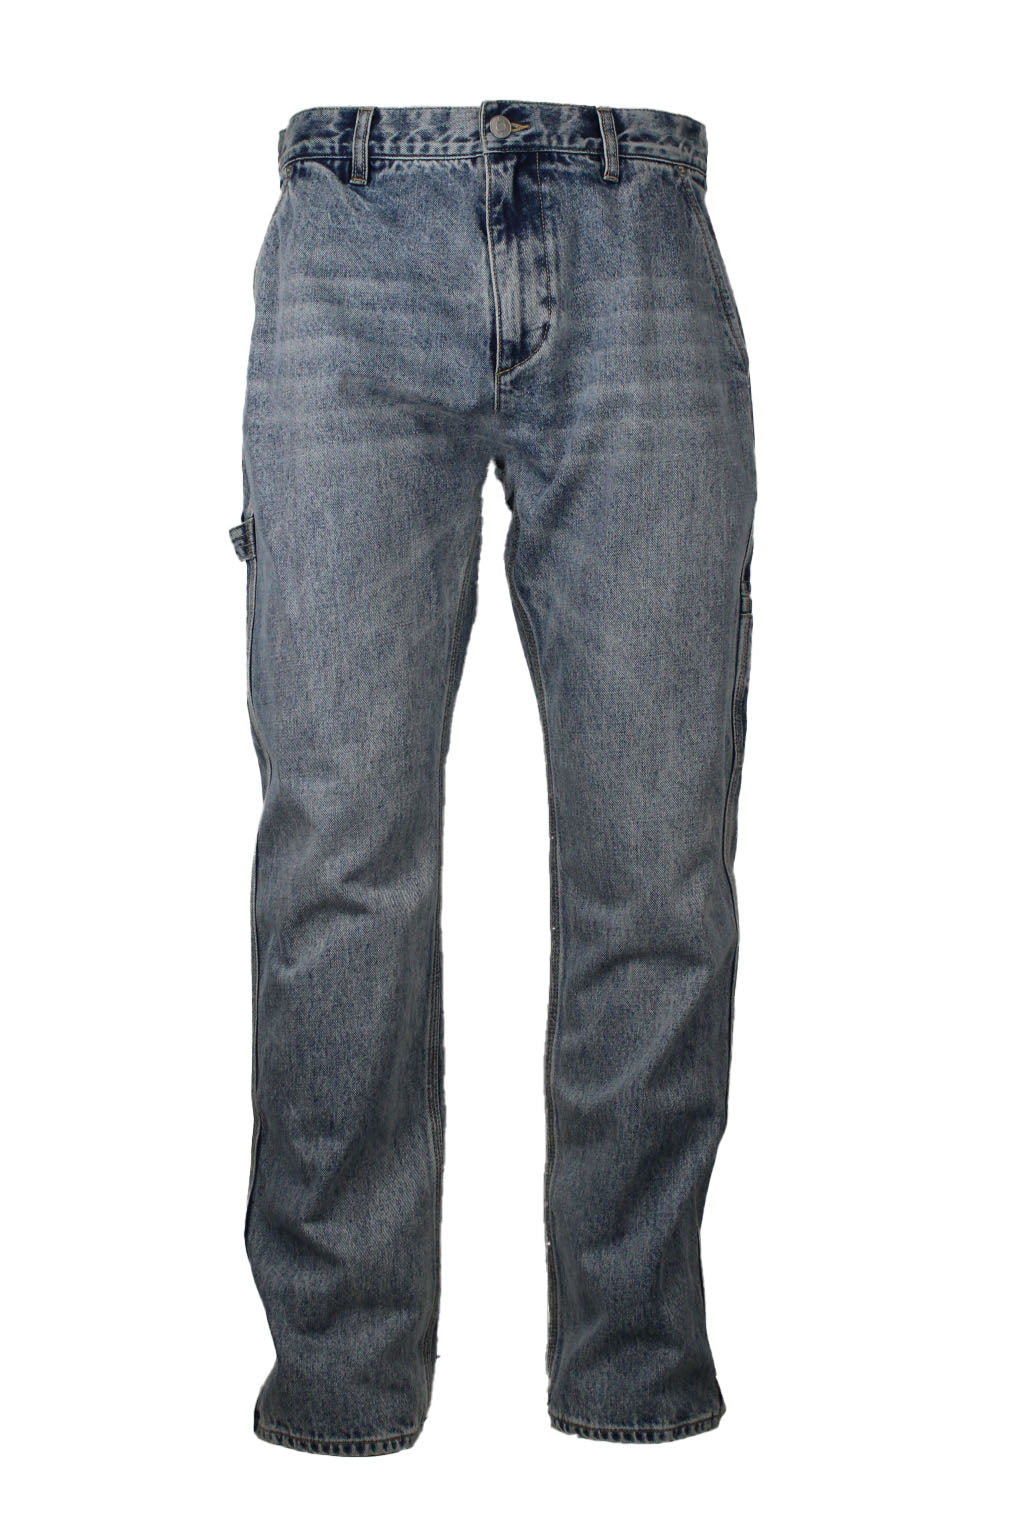 front view of kith blue denim carpenter jeans. features side hand pockets, rear pockets, left leg slot pocket, right leg hammer loop, and zip fly with branded ‘kith’ button closure.